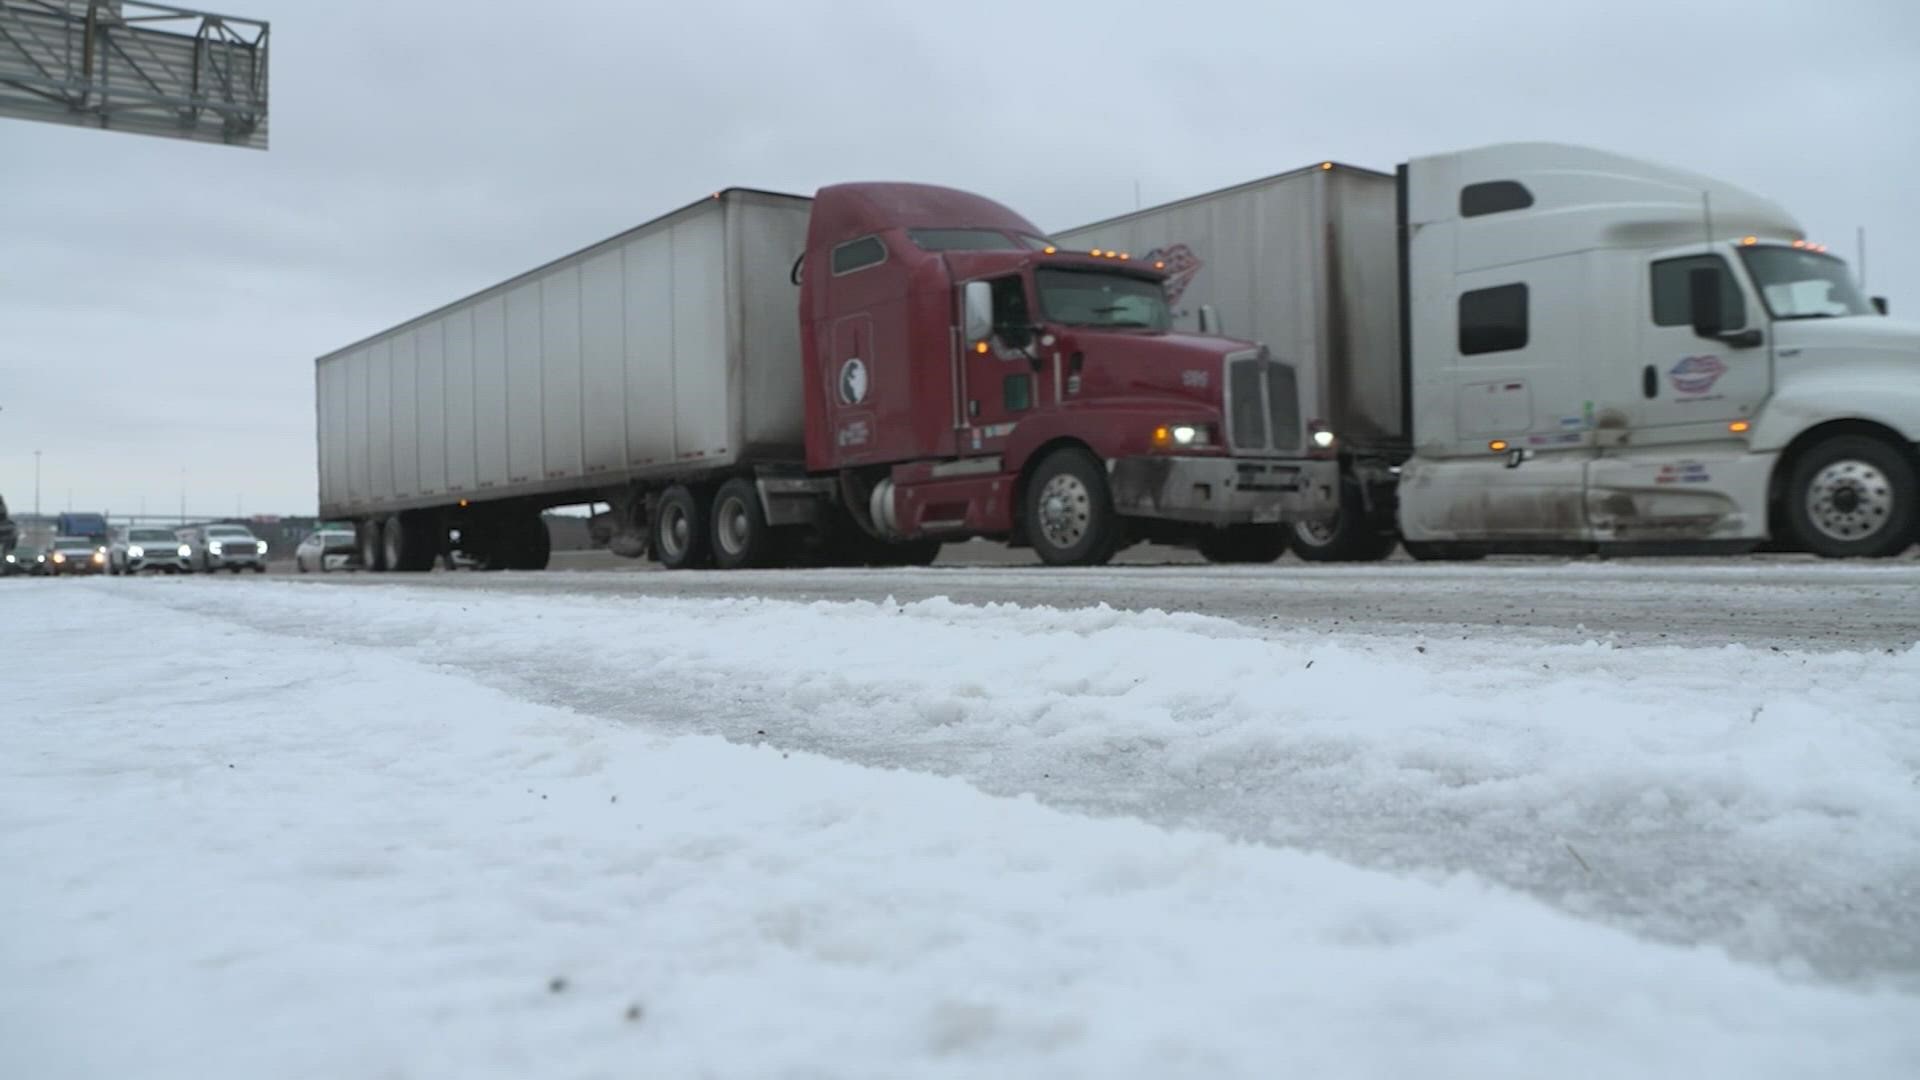 This report from our sister station, WFAA, in Dallas, as offroaders made the scene, geting some stuck semis moving.